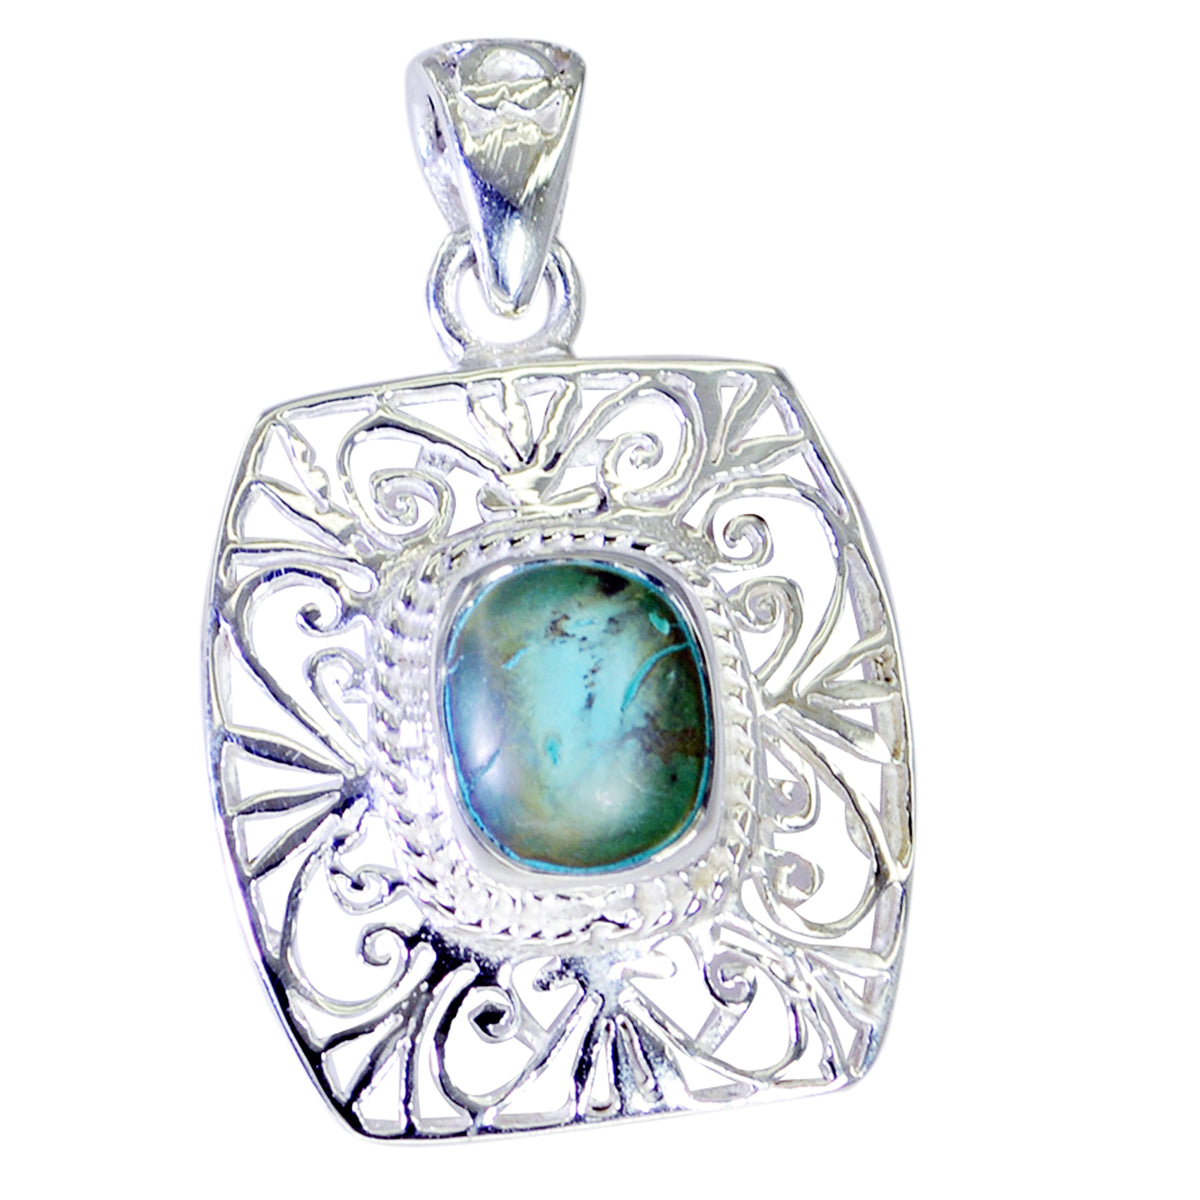 Riyo Real Gemstones Octogon Cabochon Blue Turquoise 925 Sterling Silver Pendant gift for valentine's day